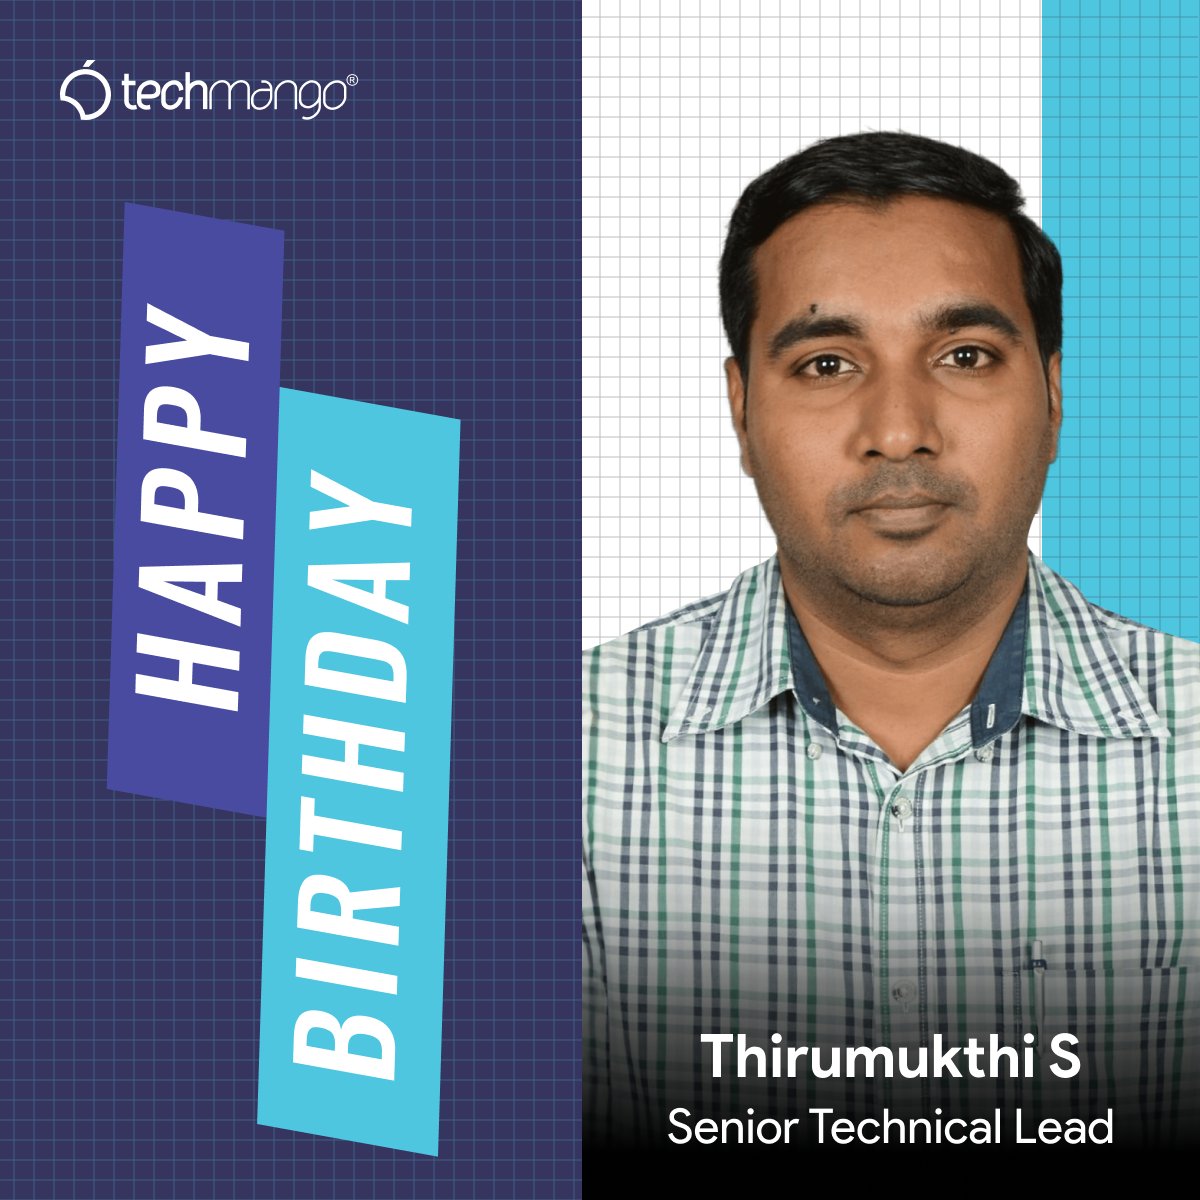 Techmango Wishes a Happy Birthday to Thirumukthi May this birthday be the start of your greatest, most wonderful journey yet. Have a fantastic day! #happybirthday #birthdaywishes #birthdaycelebration #birthdayparty #birthdaycheers #birthdayvibes #birthdaypost #birthdaygift